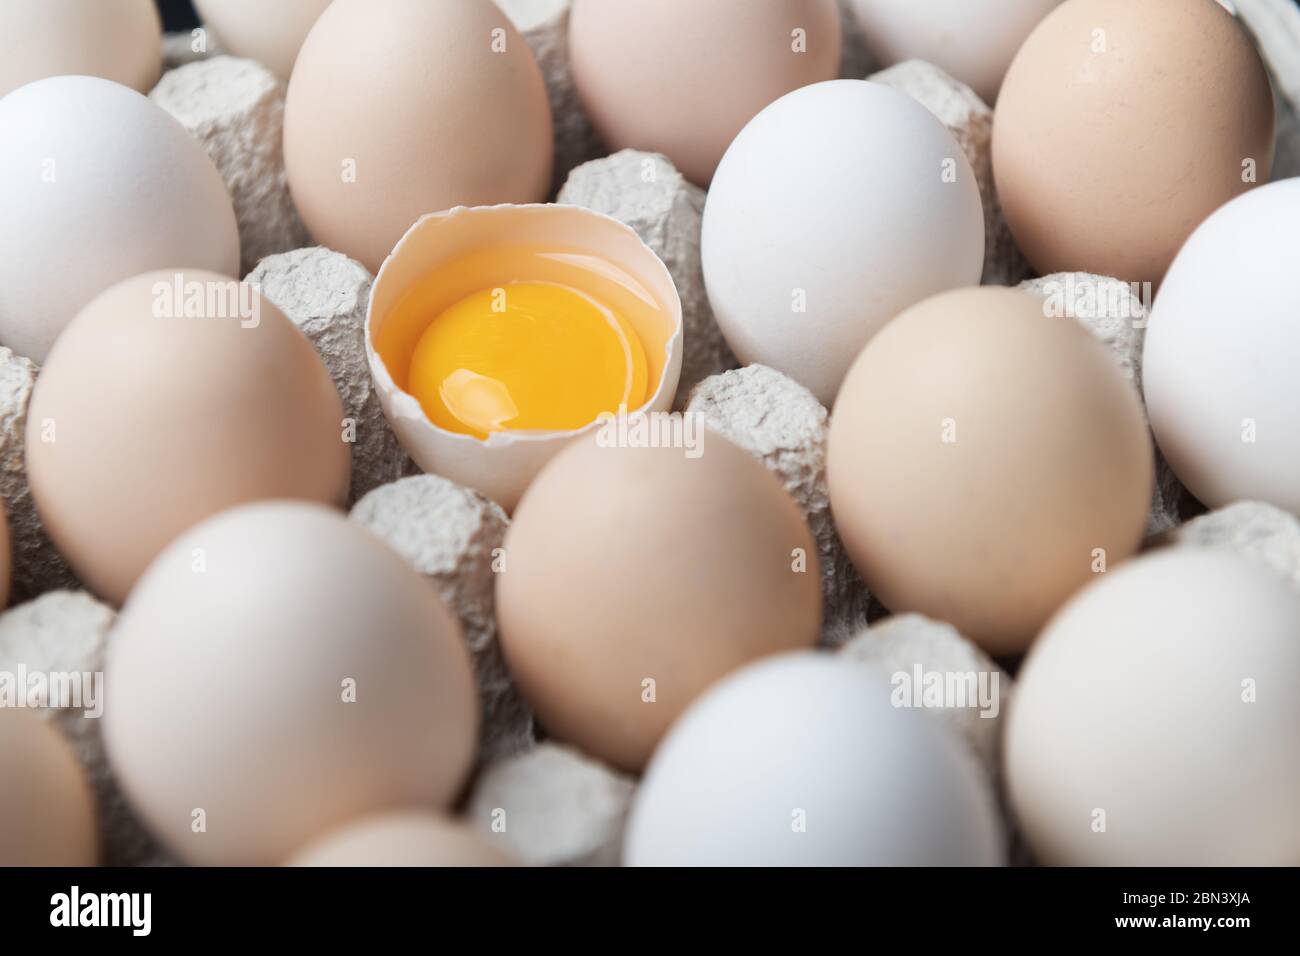 Chicken eggs in organic packaging closeup. Egg half broken among other eggs. Food photography Stock Photo